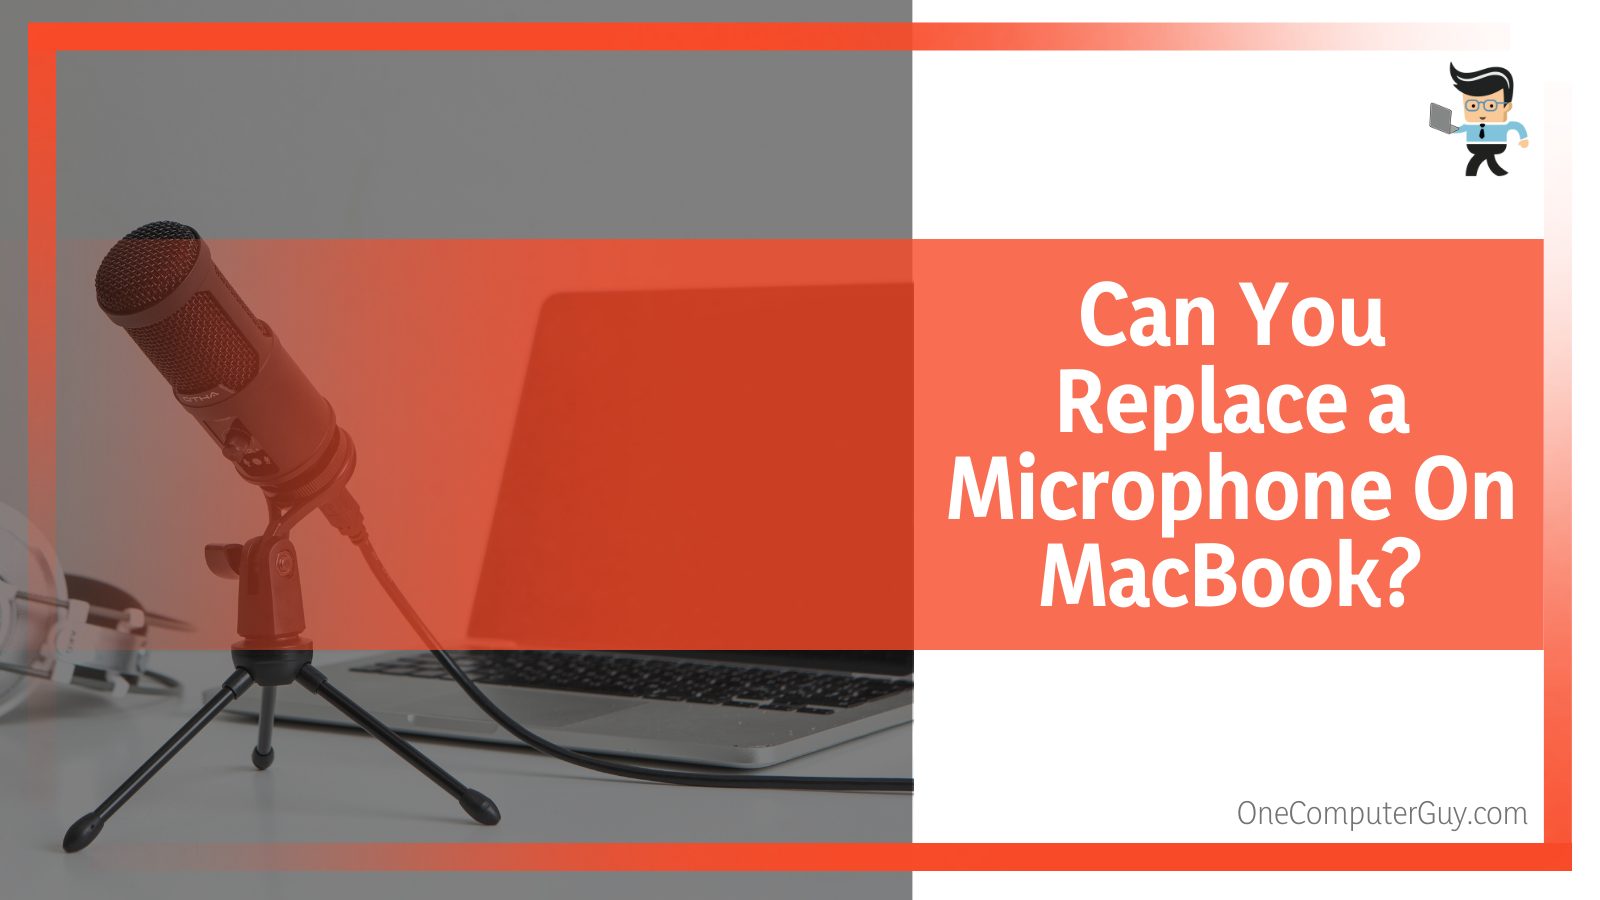 Can You Replace a Microphone On MacBook